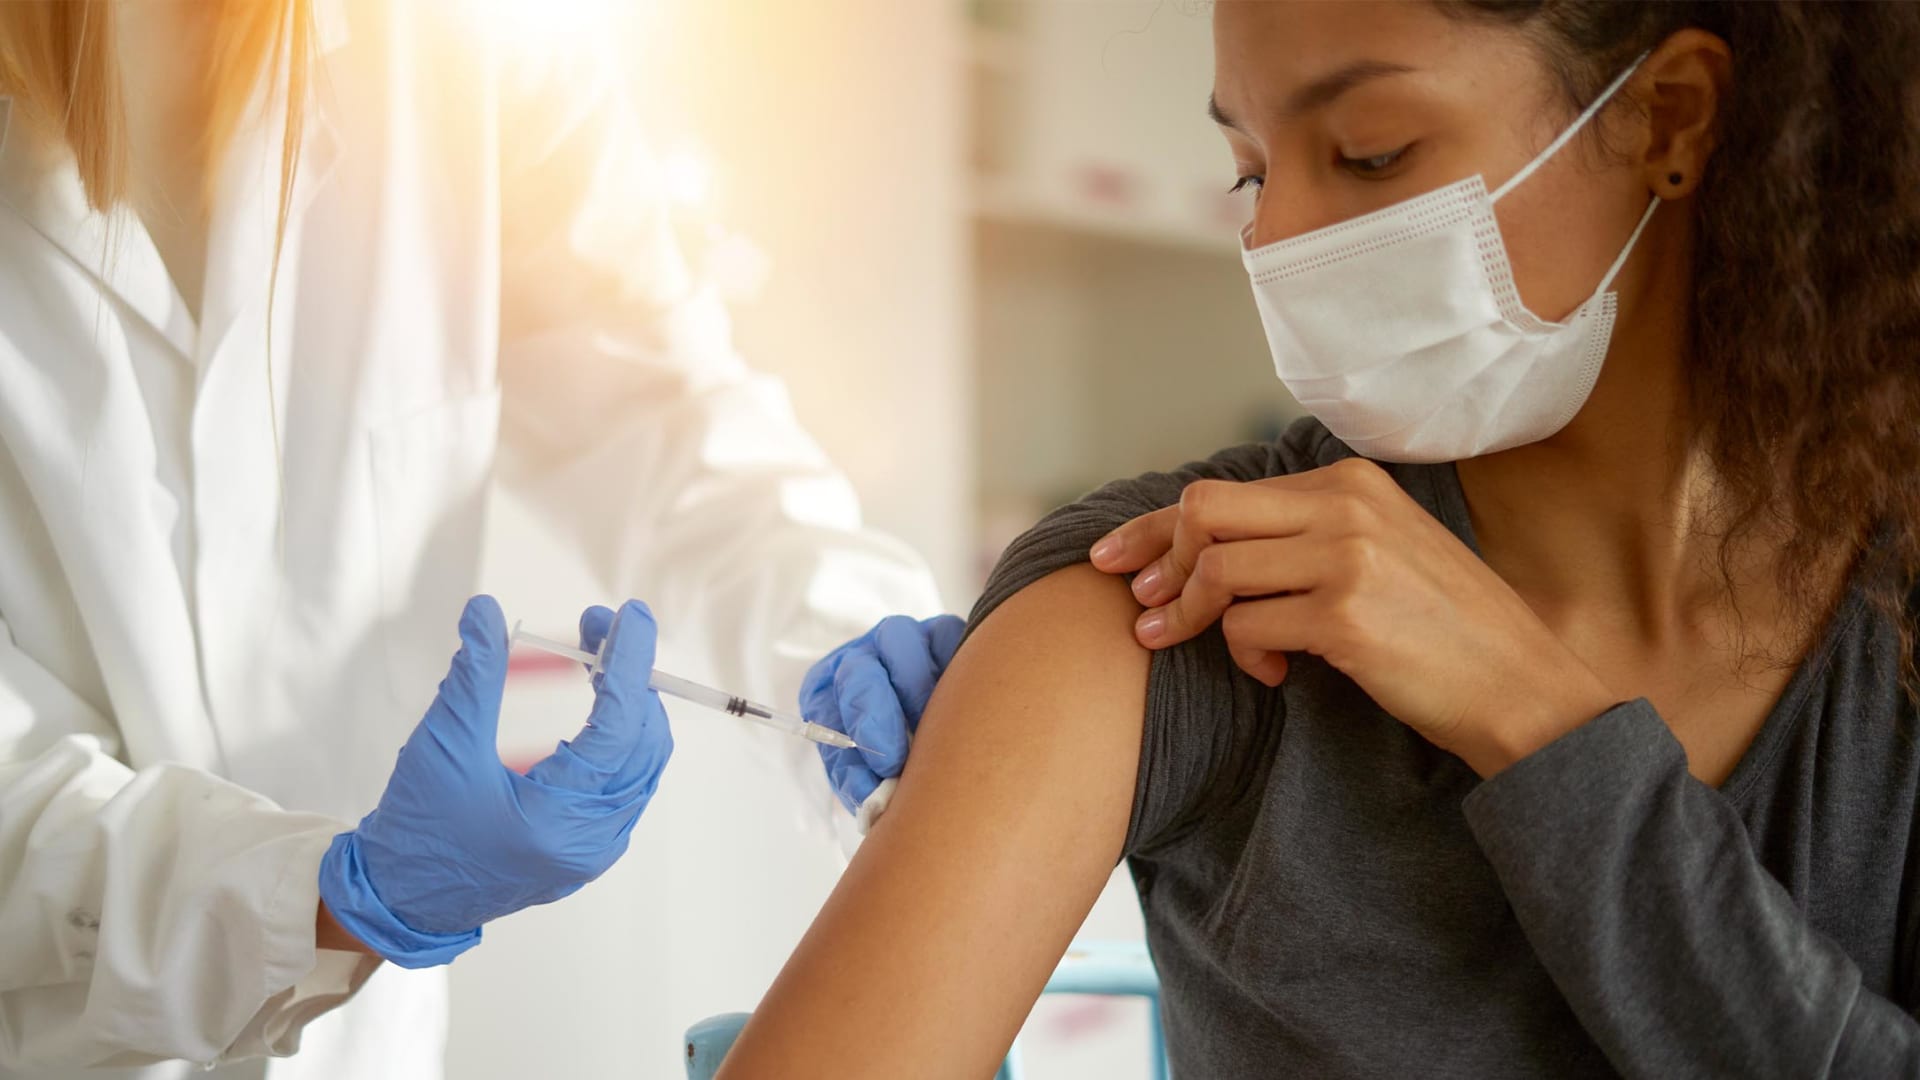 Why Now More Than Ever You Should Encourage Employees to Get a Flu Shot